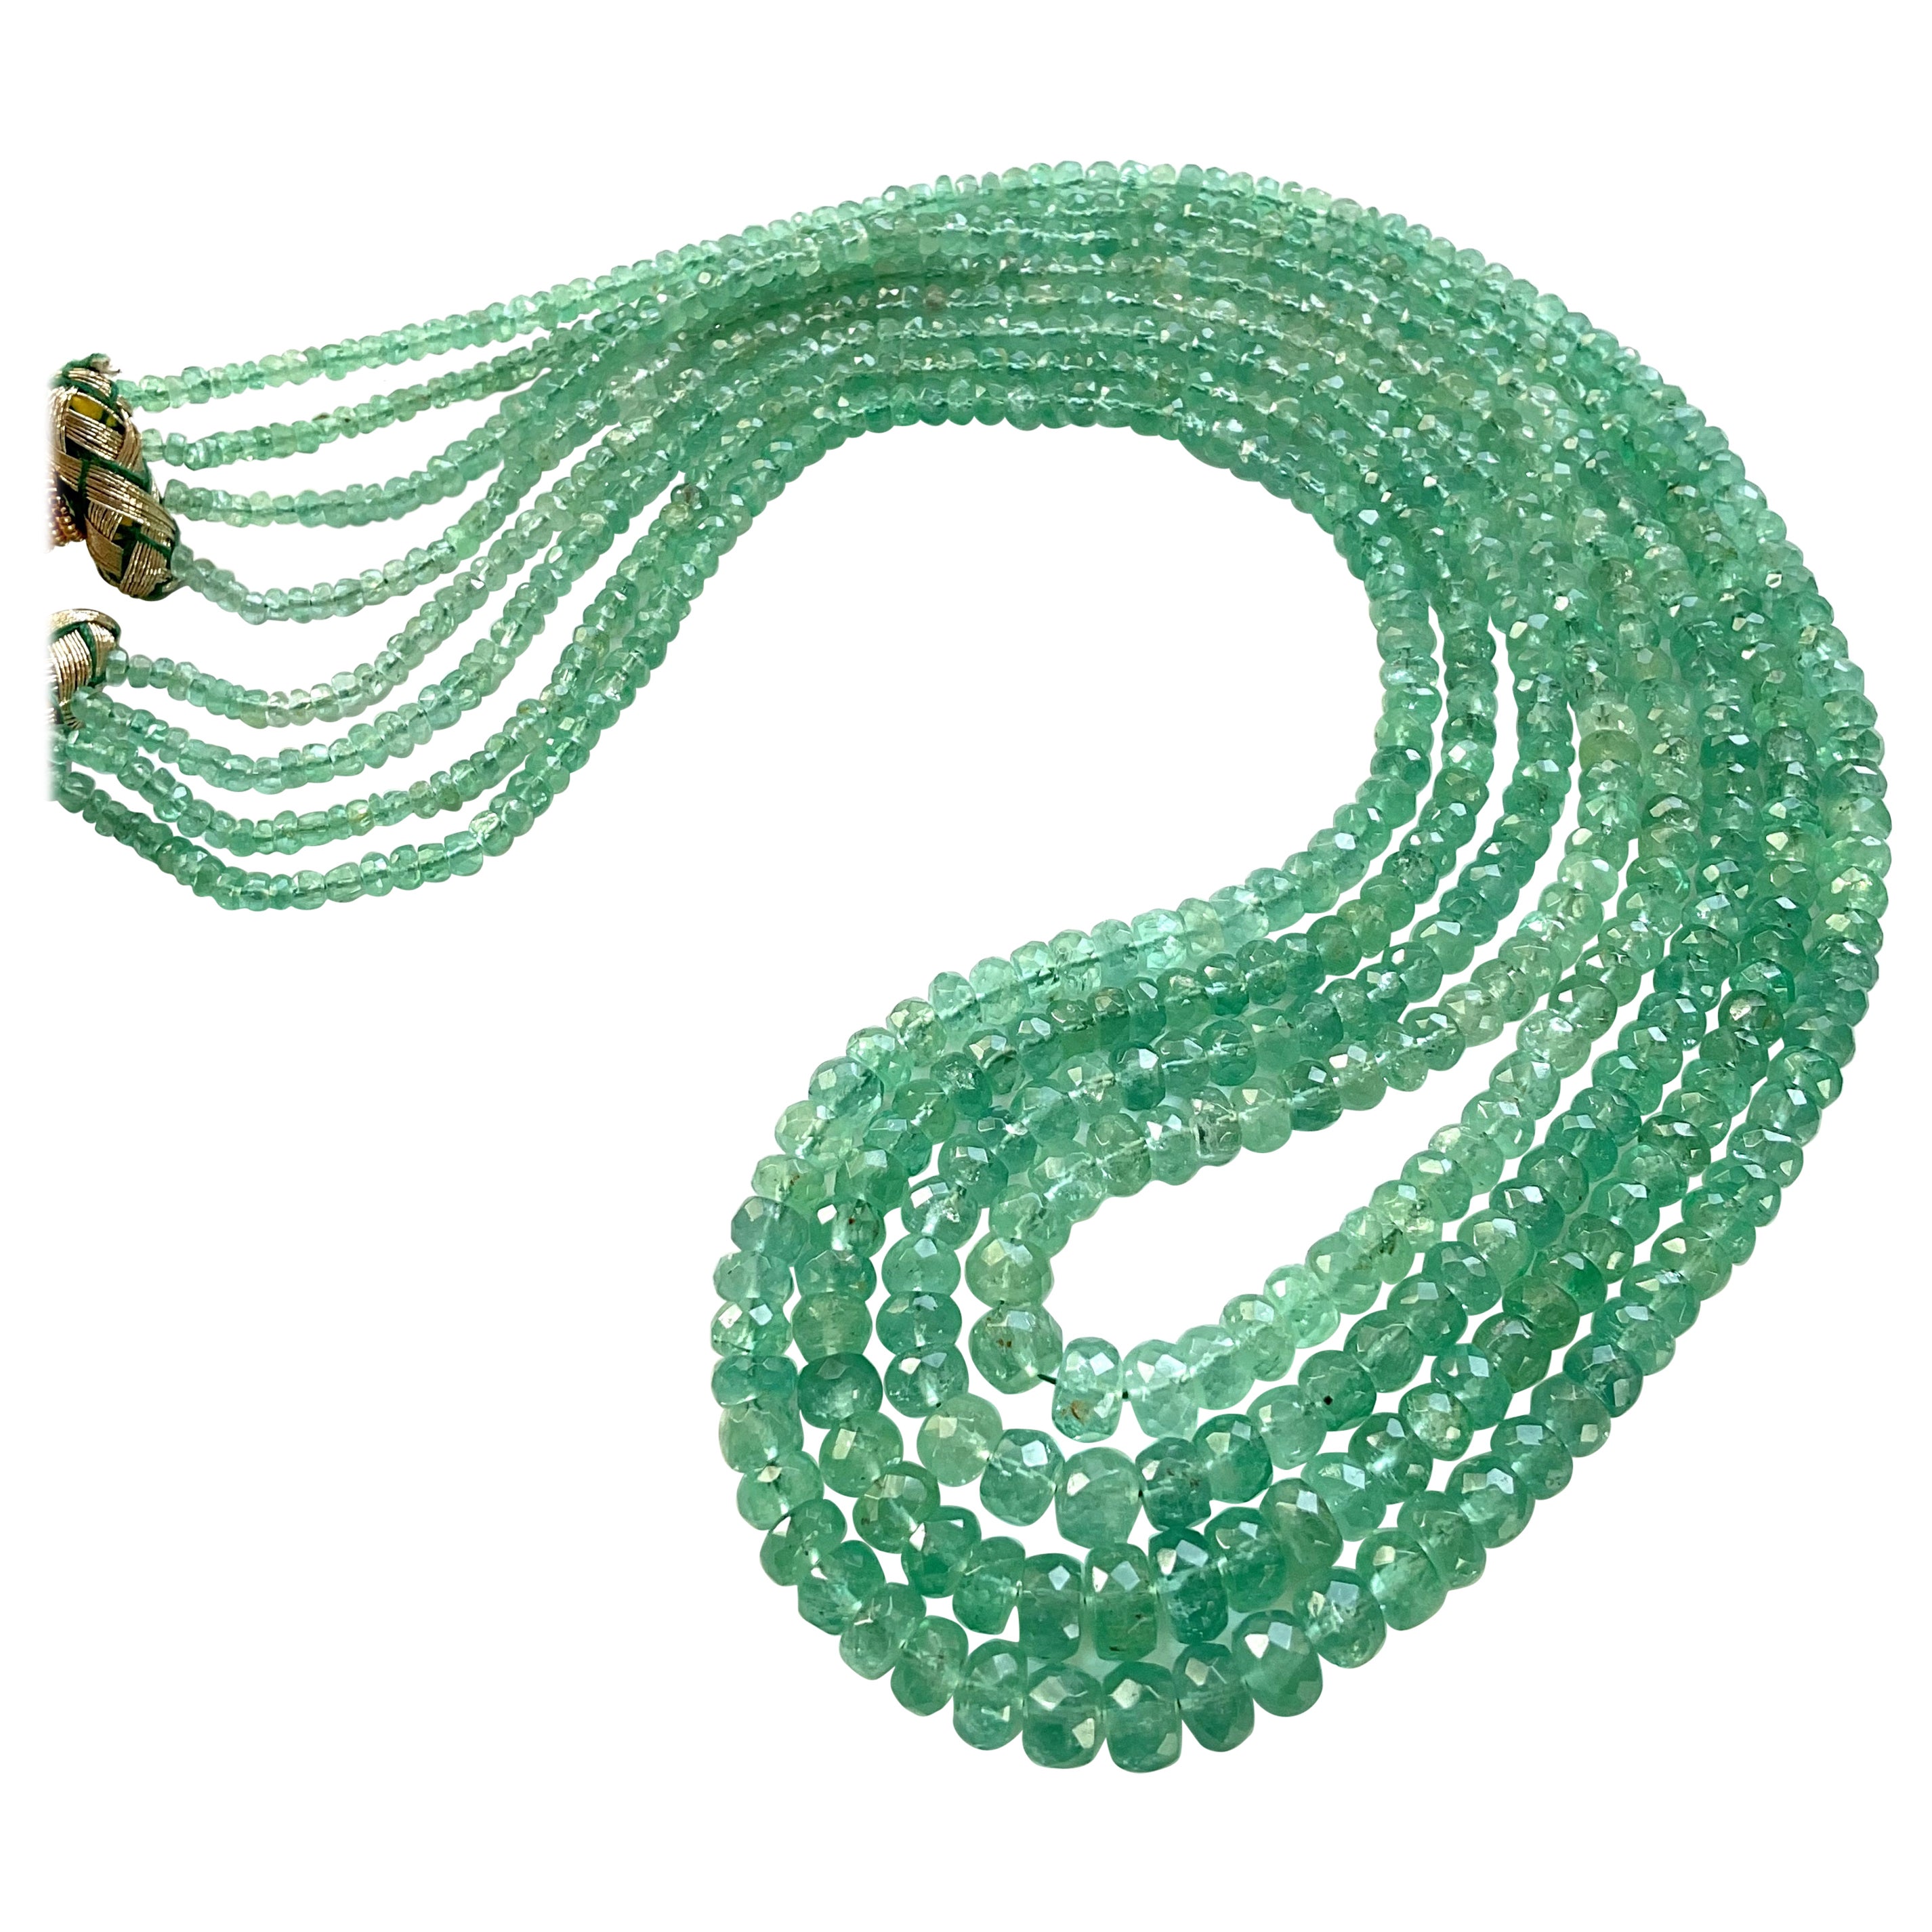 198.40 Carats Panjshir Emerald Faceted Beads For Fine Jewelry Natural Gemstone For Sale